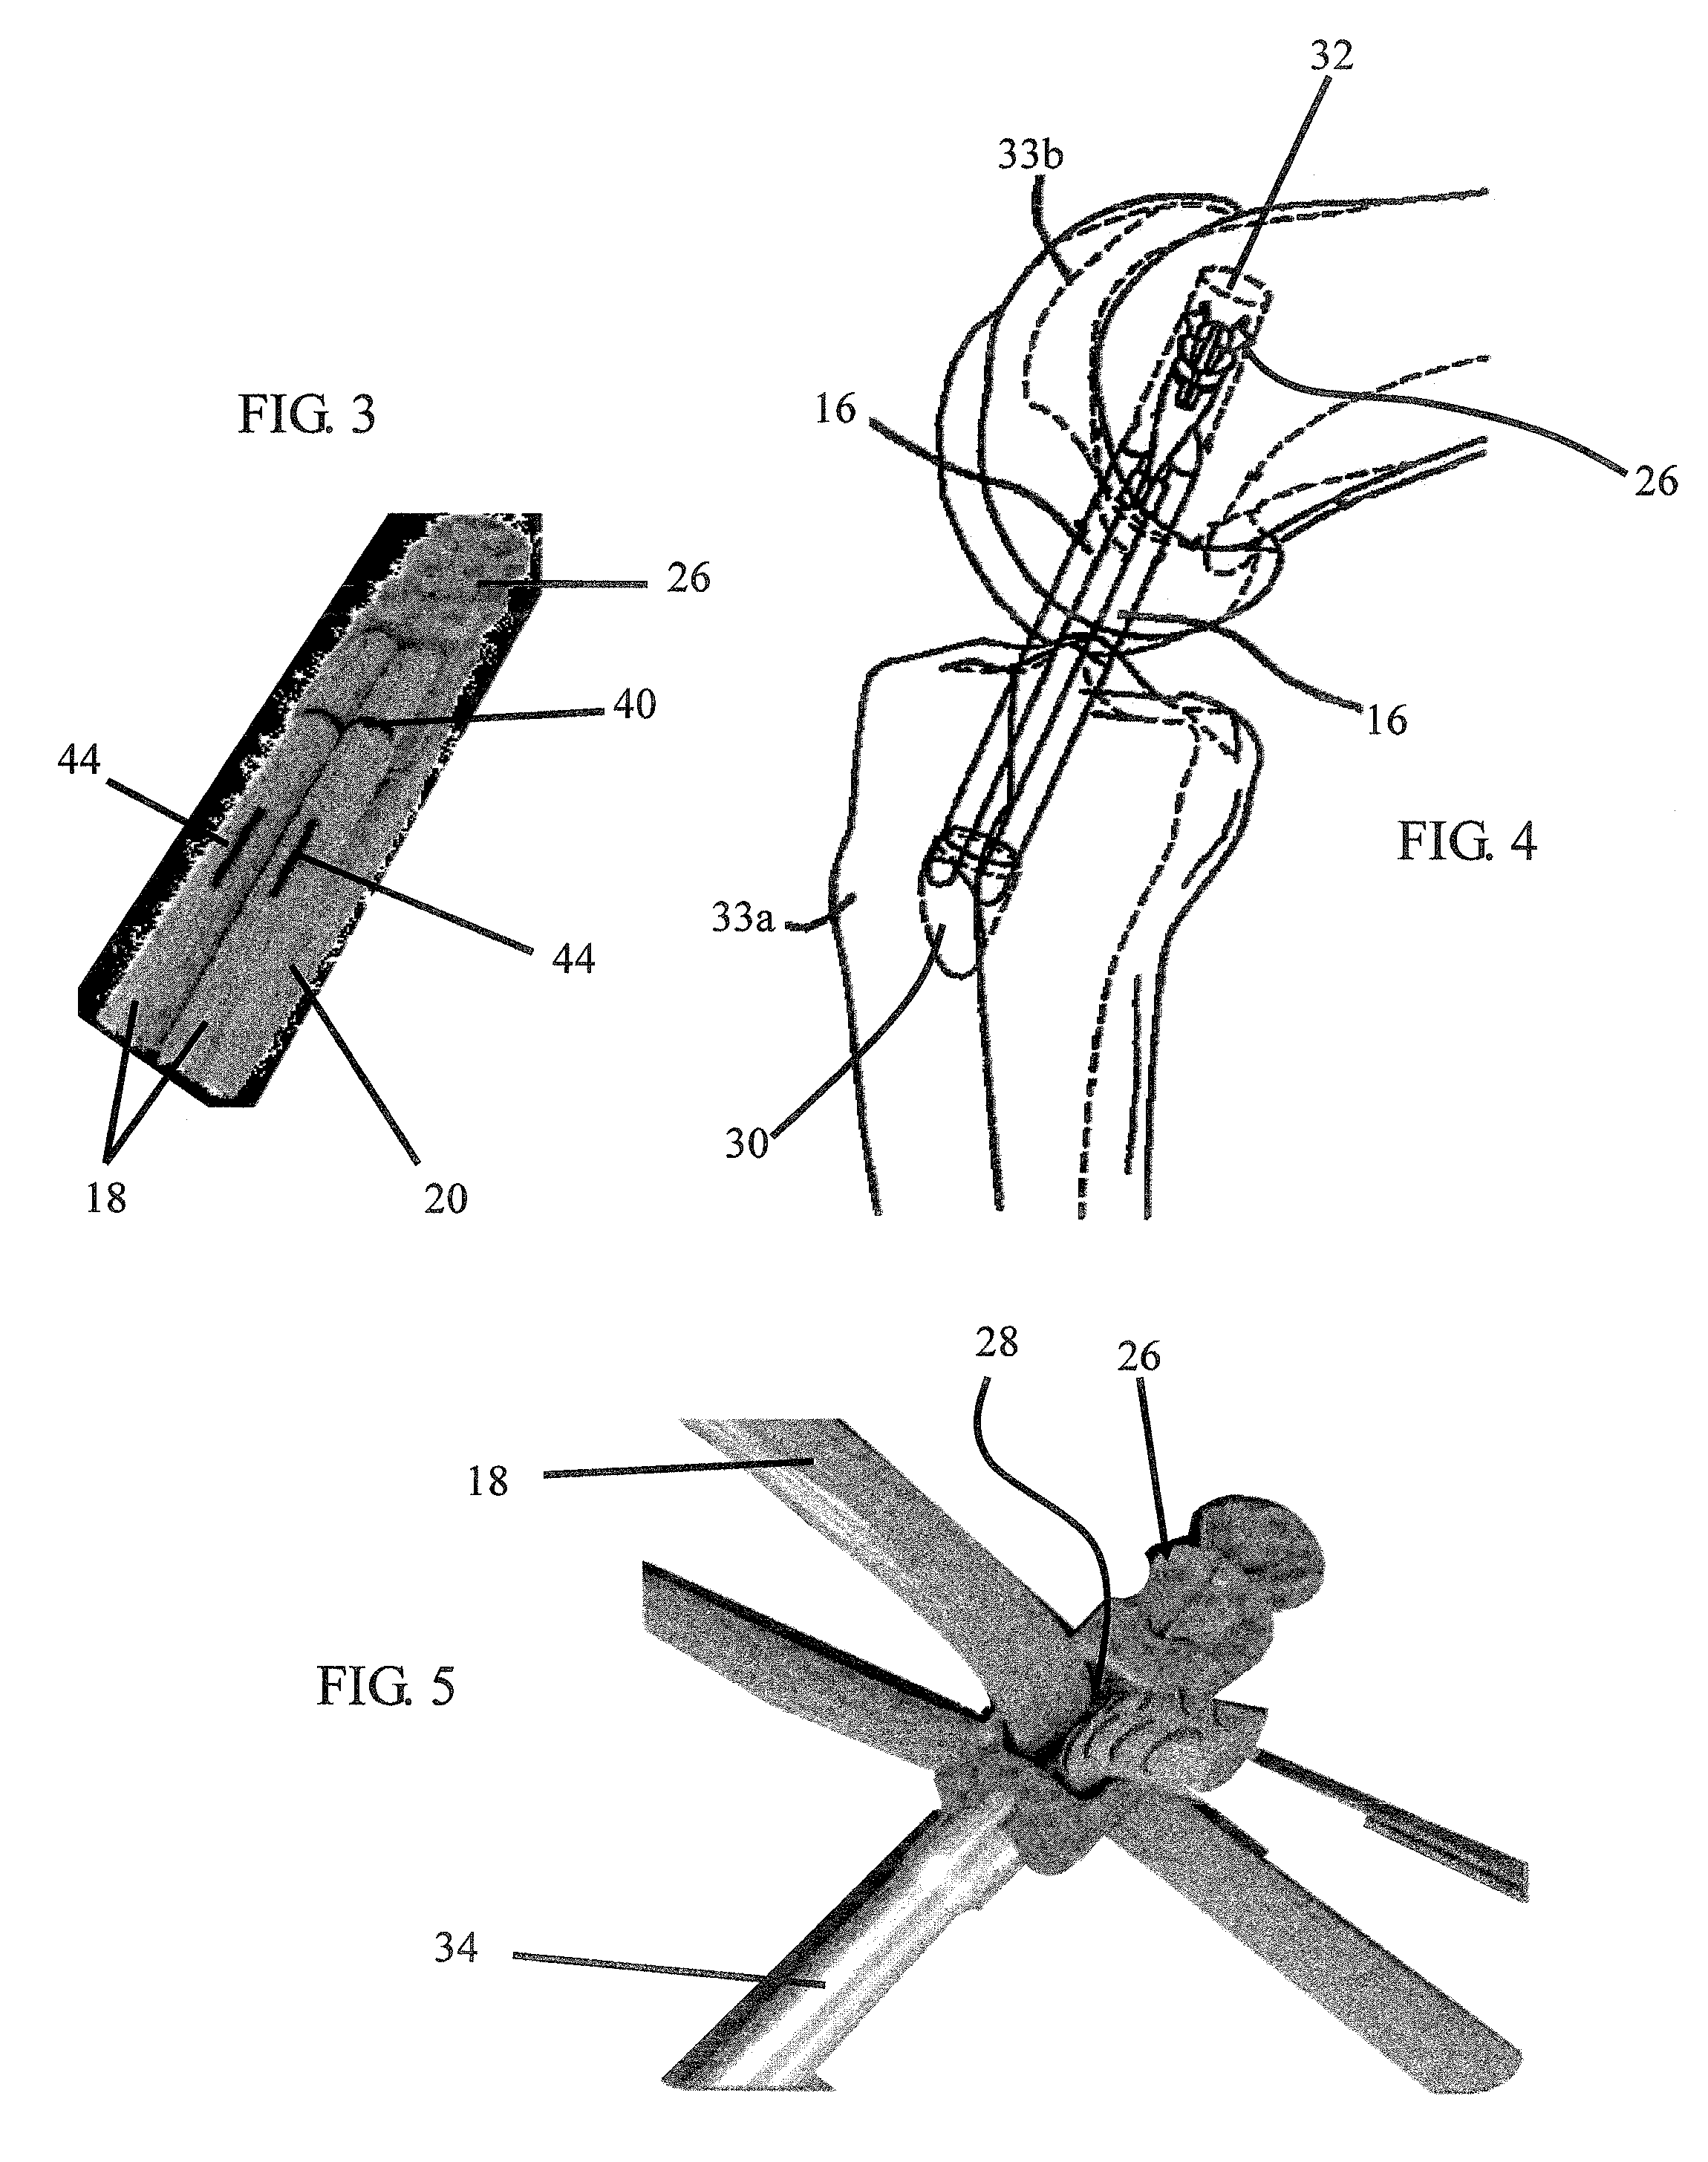 Method for surgically repairing a damaged ligament